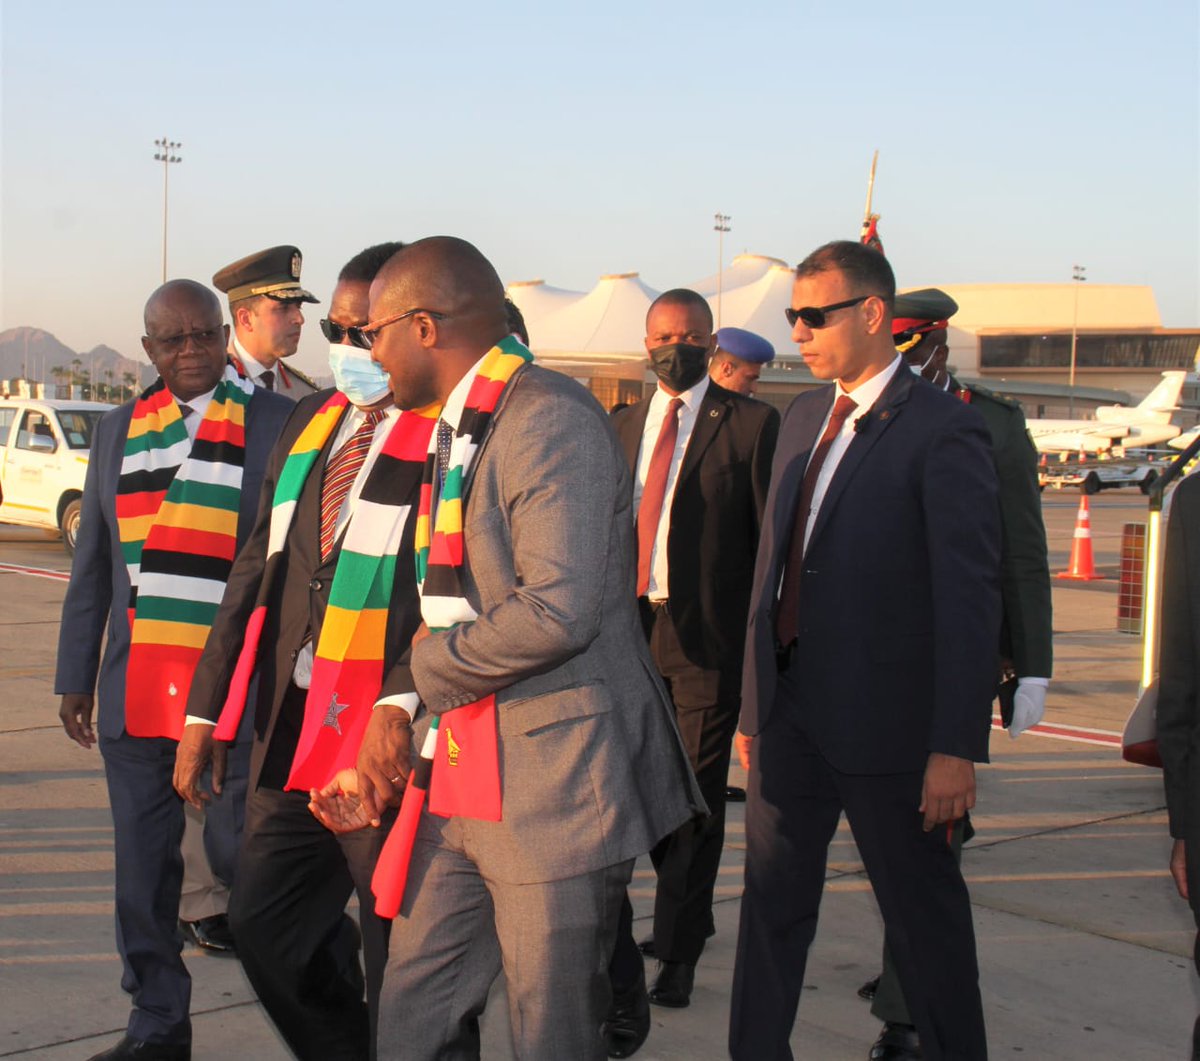 His Excellency The President of The Republic of Zimbabwe @edmnangagwa has landed in Egypt 🇪🇬 for the Cop 27